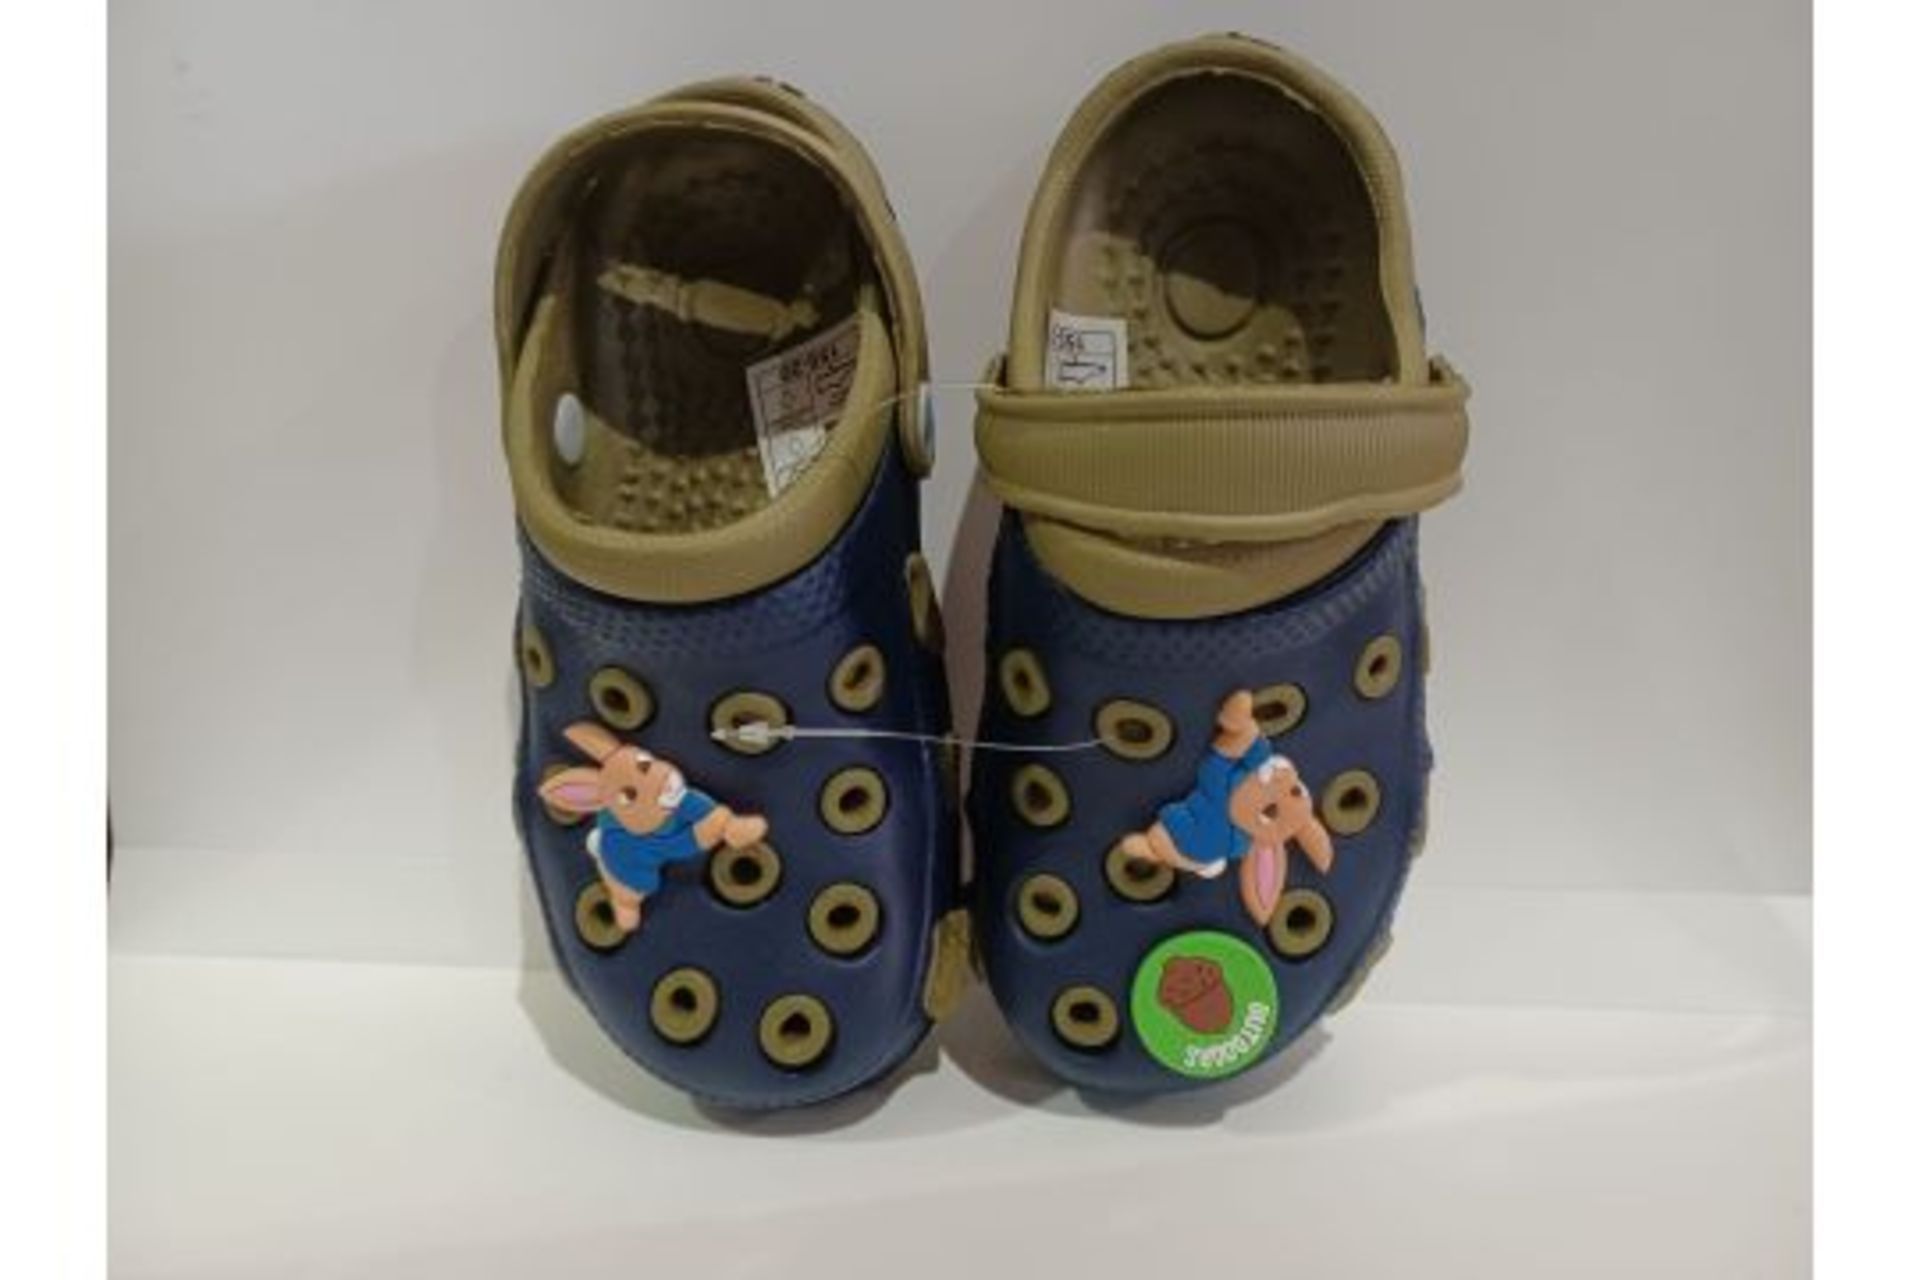 TRADE LOT 108 X NEW PACKAGED PAIRS OF PETER THE RABIT CLOGS STYLE CHILDRENS SHOES. ROW 3RACK